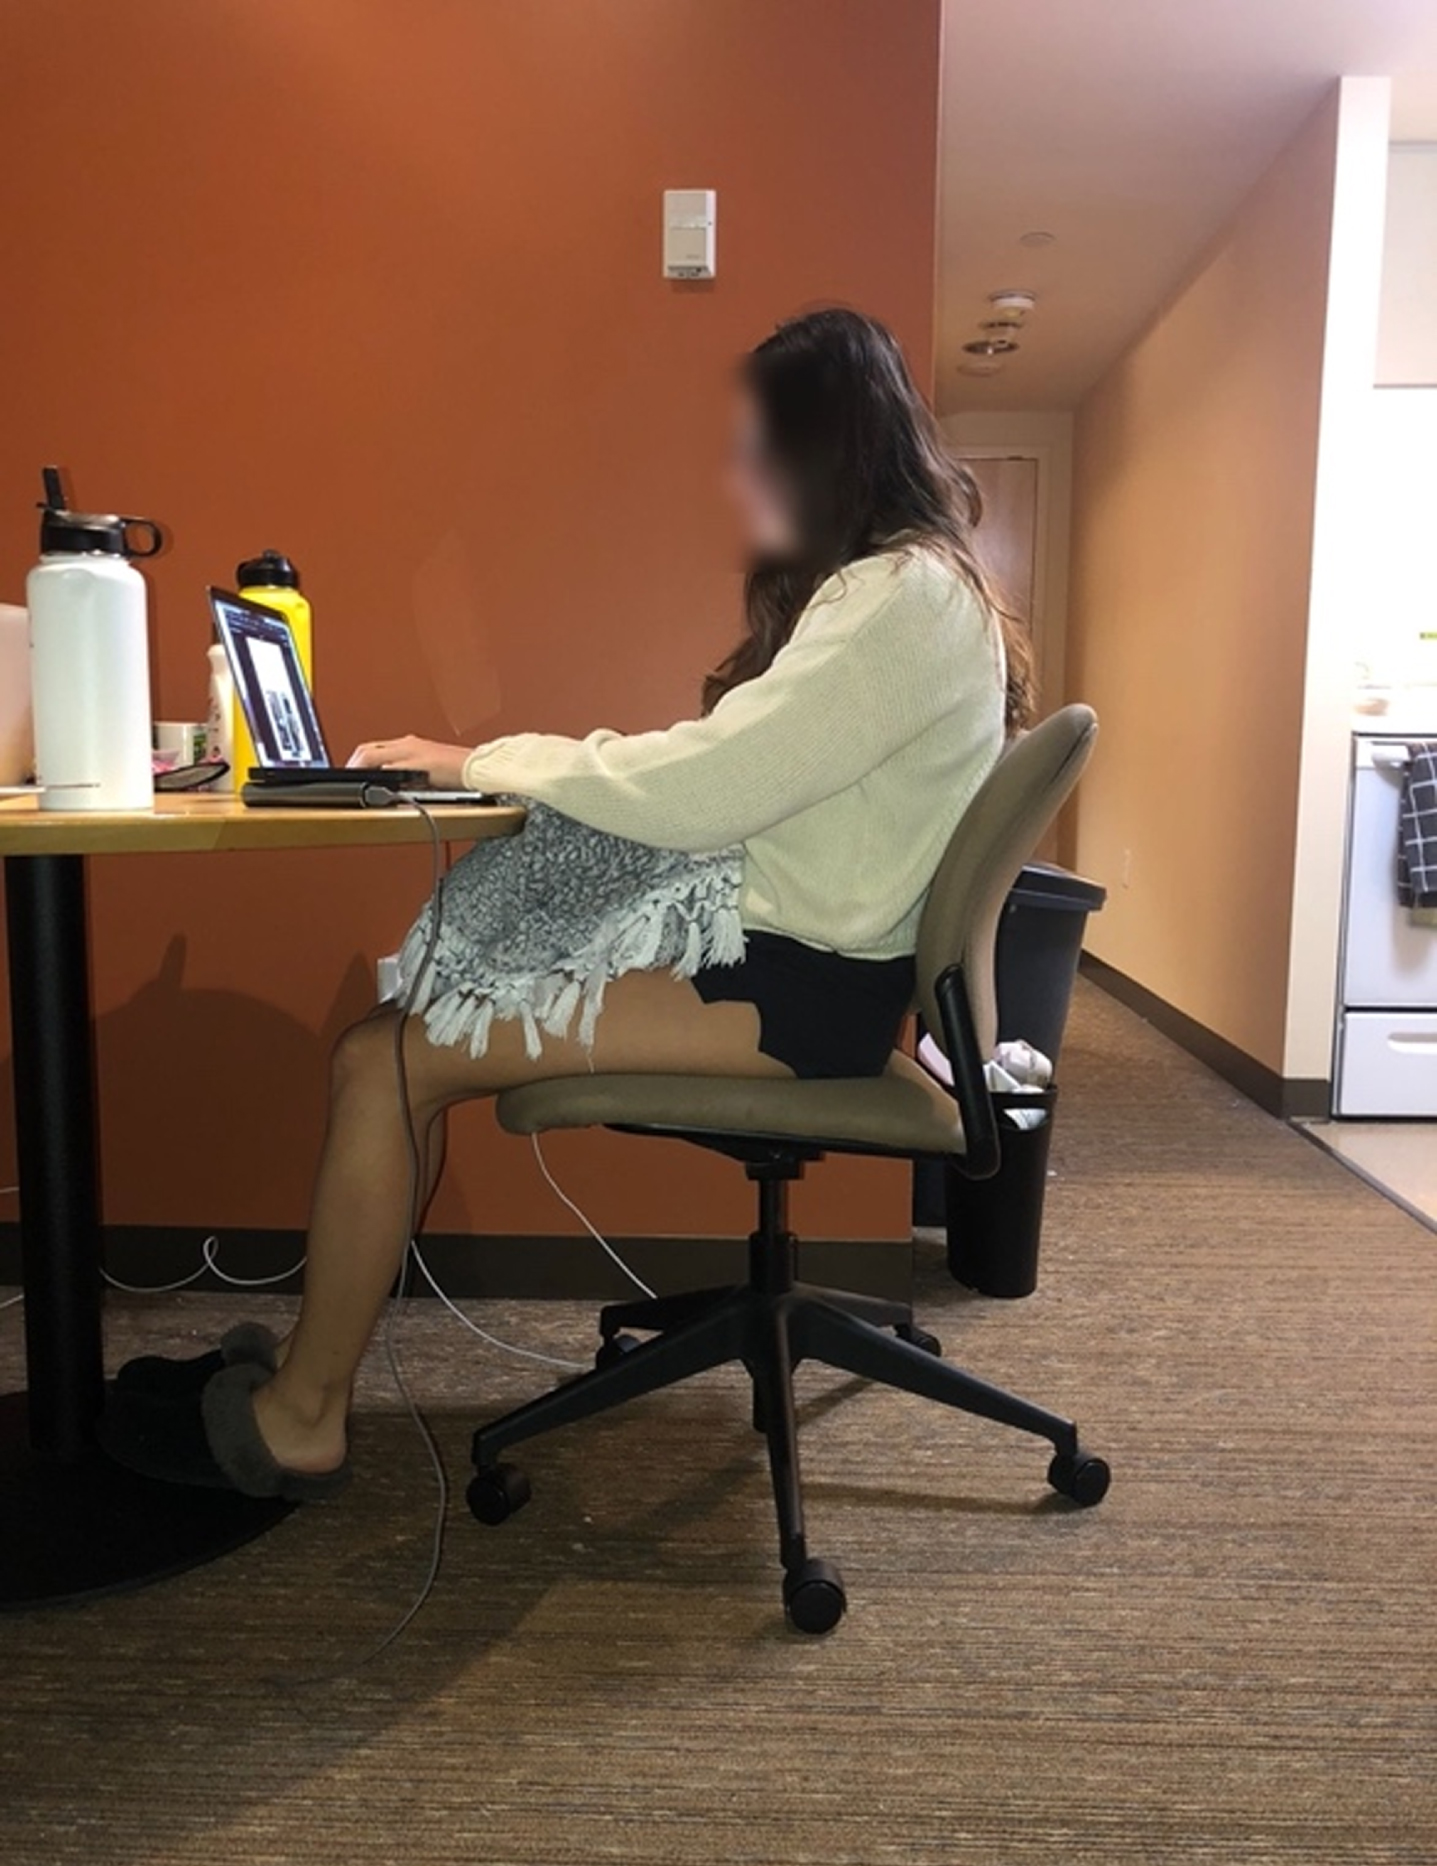 Chair with lumbar support. An example of a participant who made an improvement by raising her laptop and an ineffective change by selecting a different chair without lumbar support.